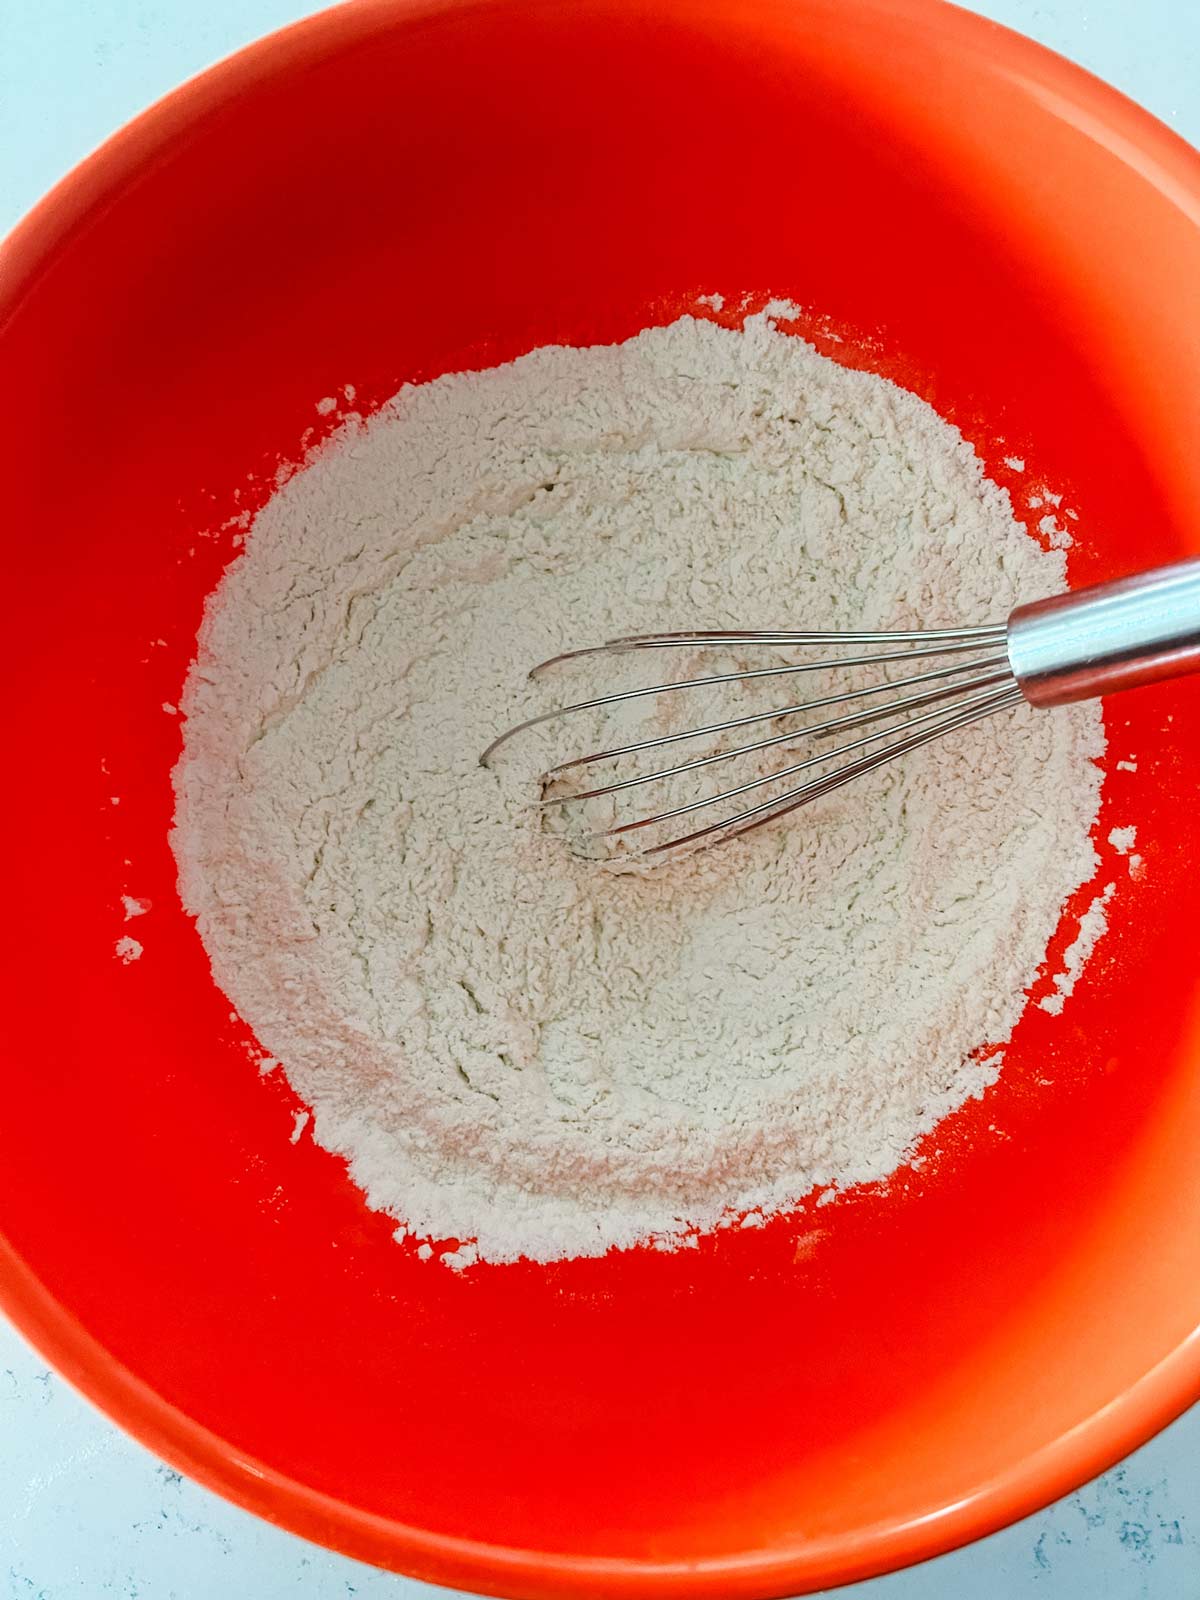 Flour, salt, sugar, and baking soda whisked together in a large bowl.